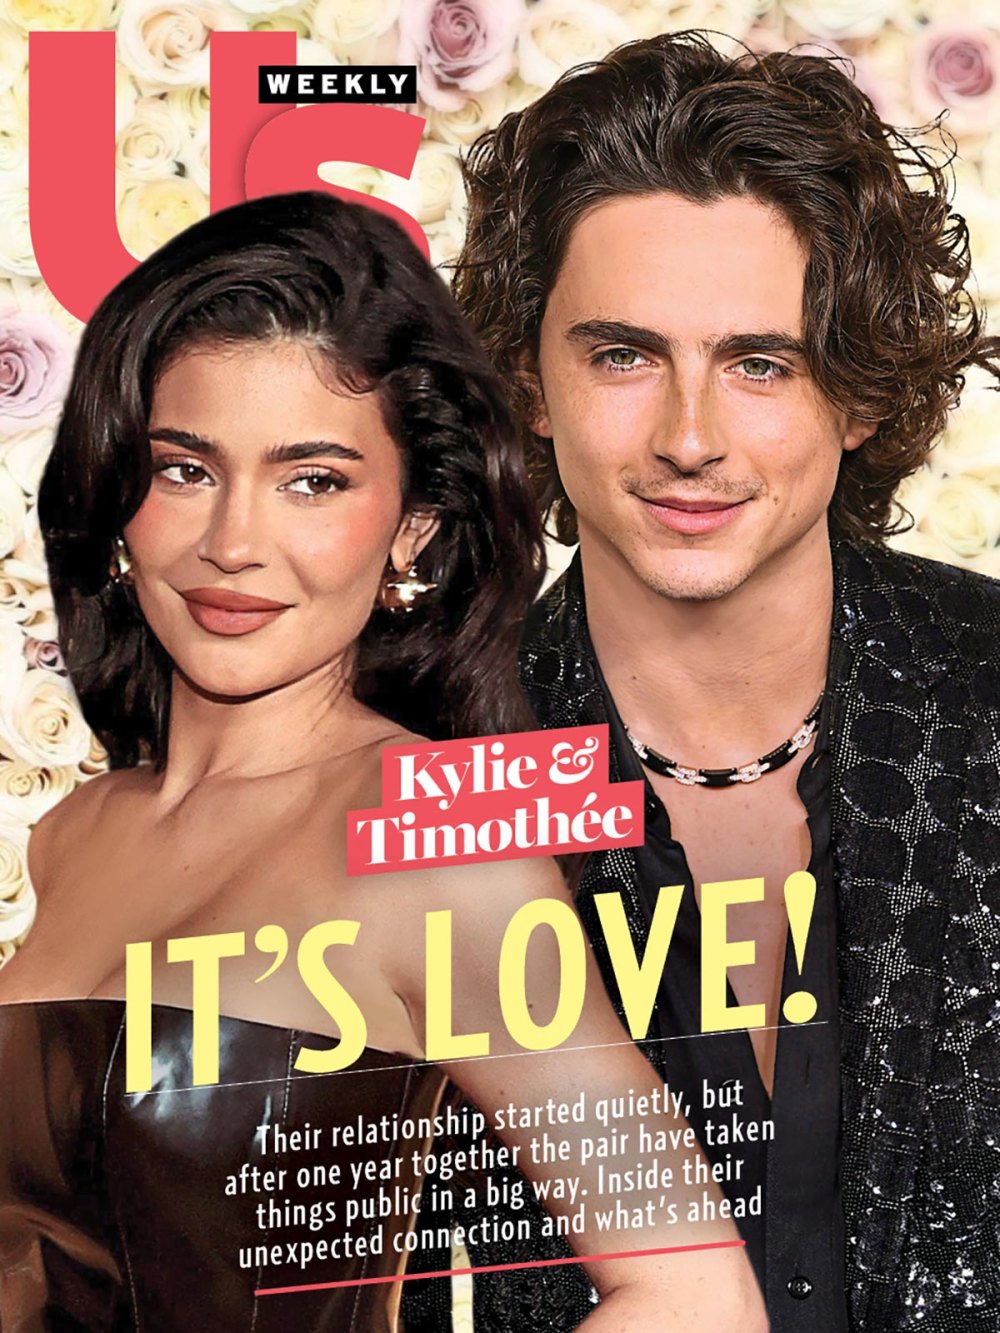 Kylie Jenner and Timothee Chalamet Are 'In Love' and ‘Getting Serious ...